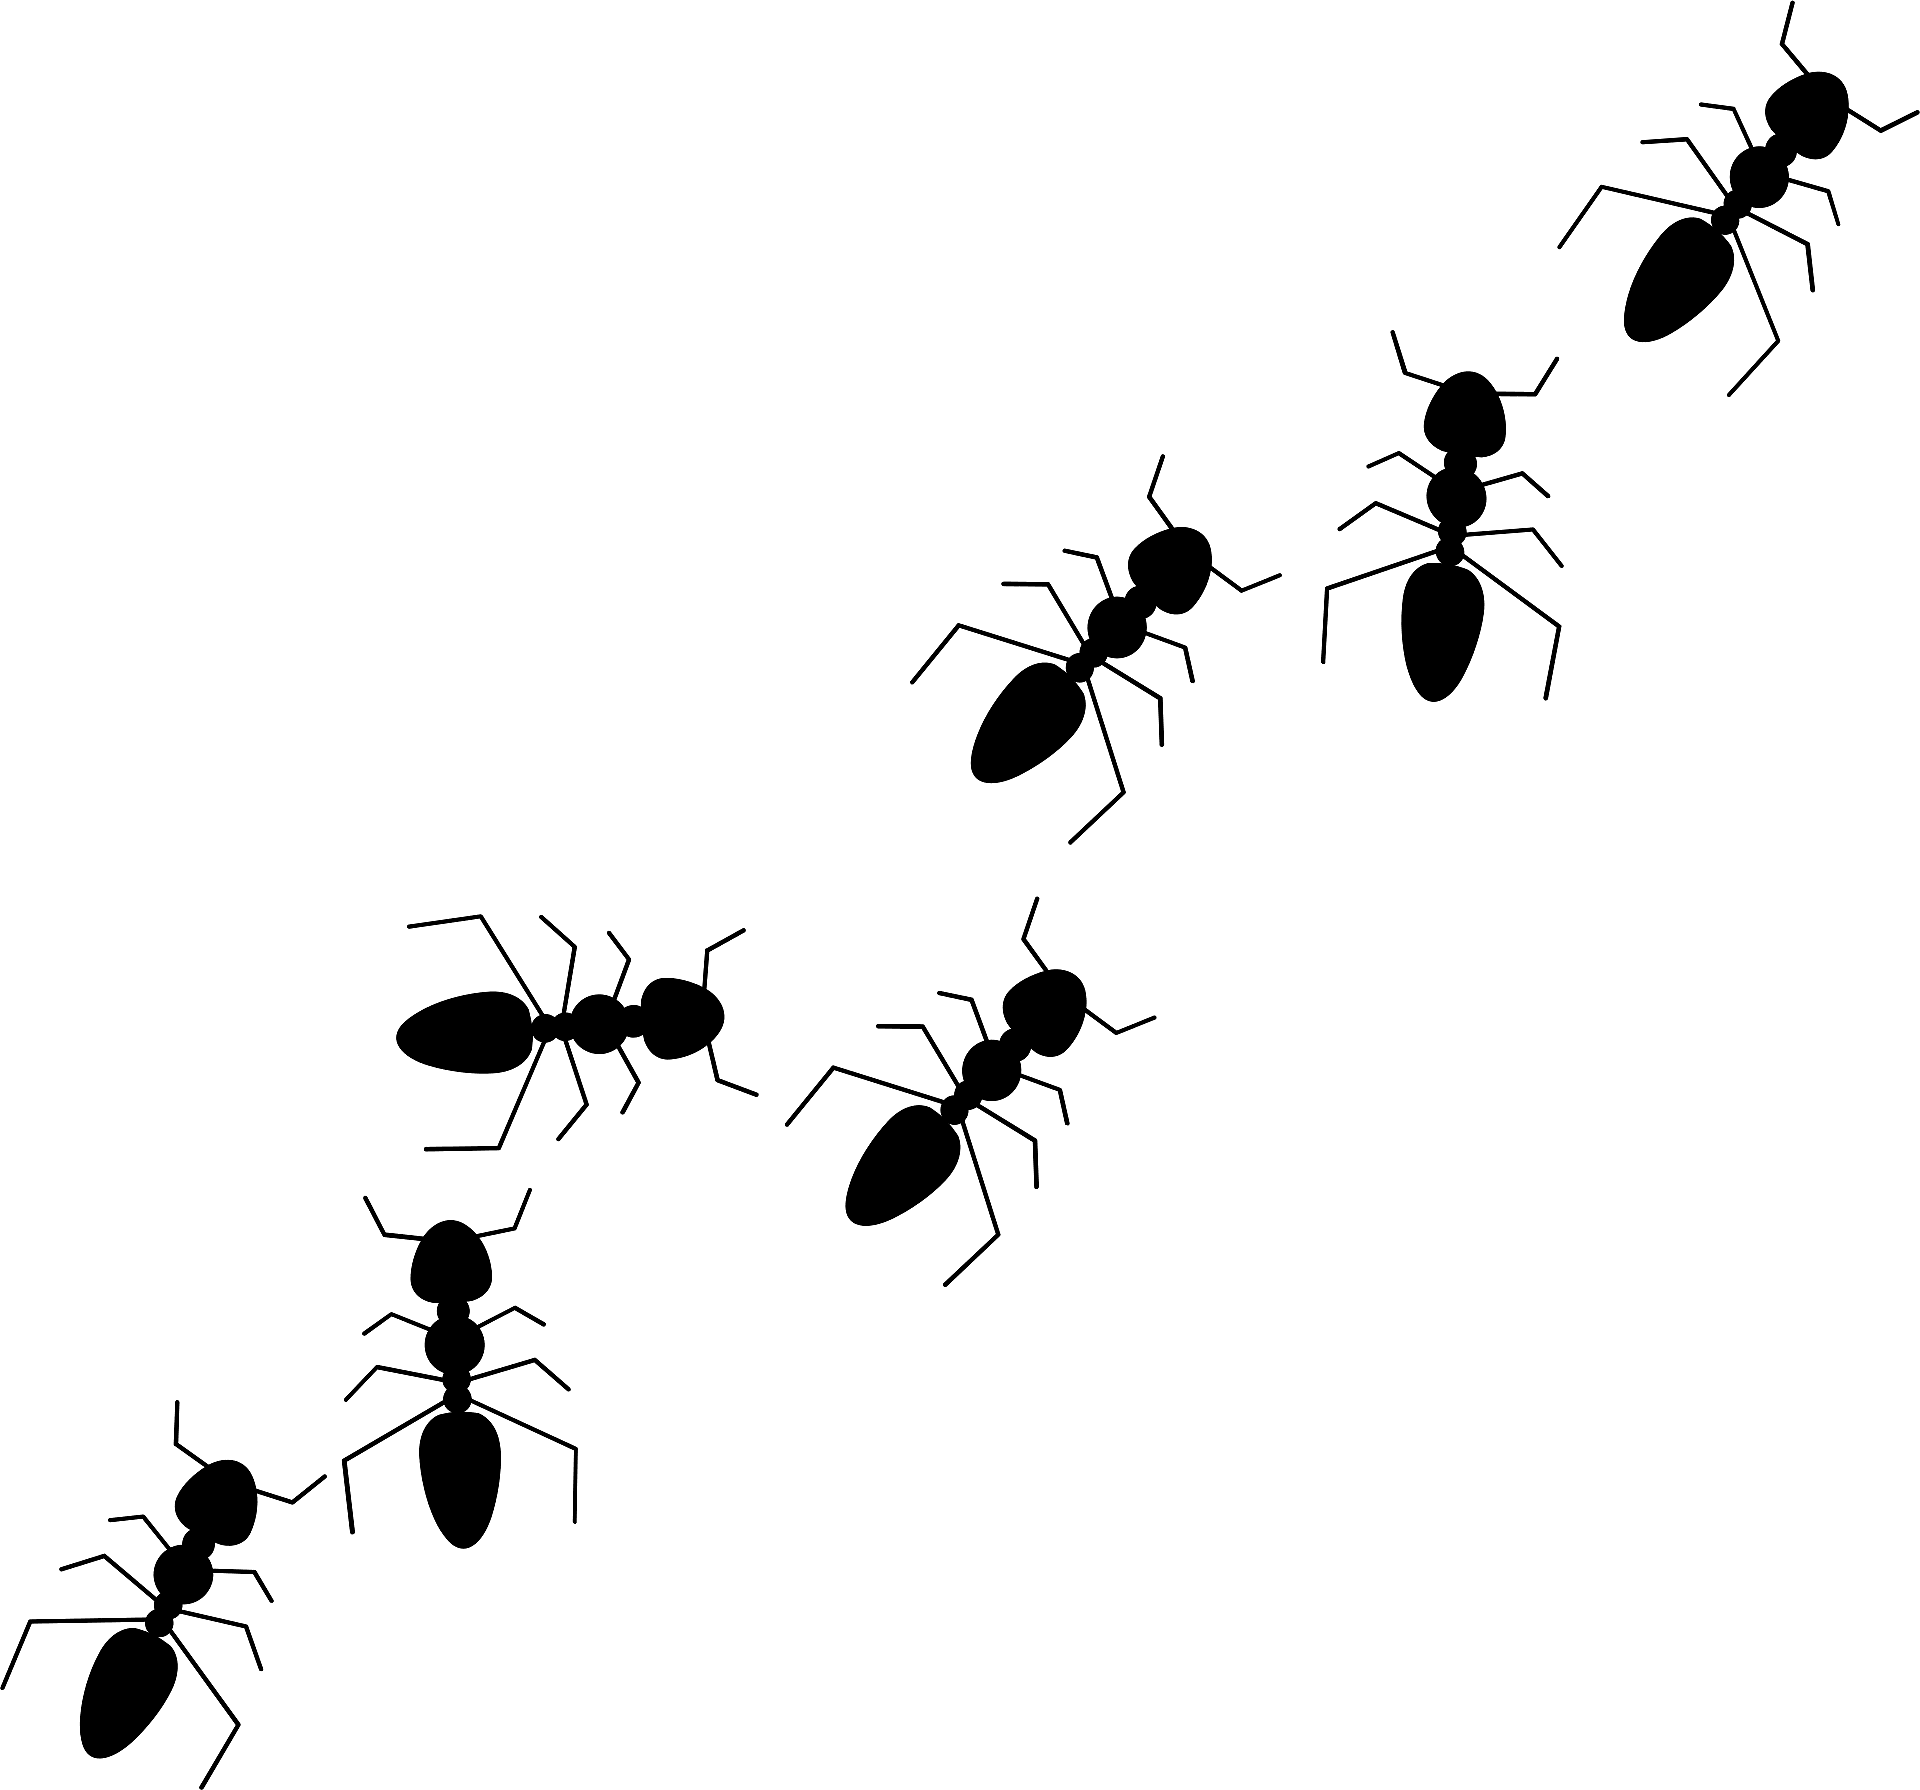 Ant cliparts - Clipart Library - Clip Art Library